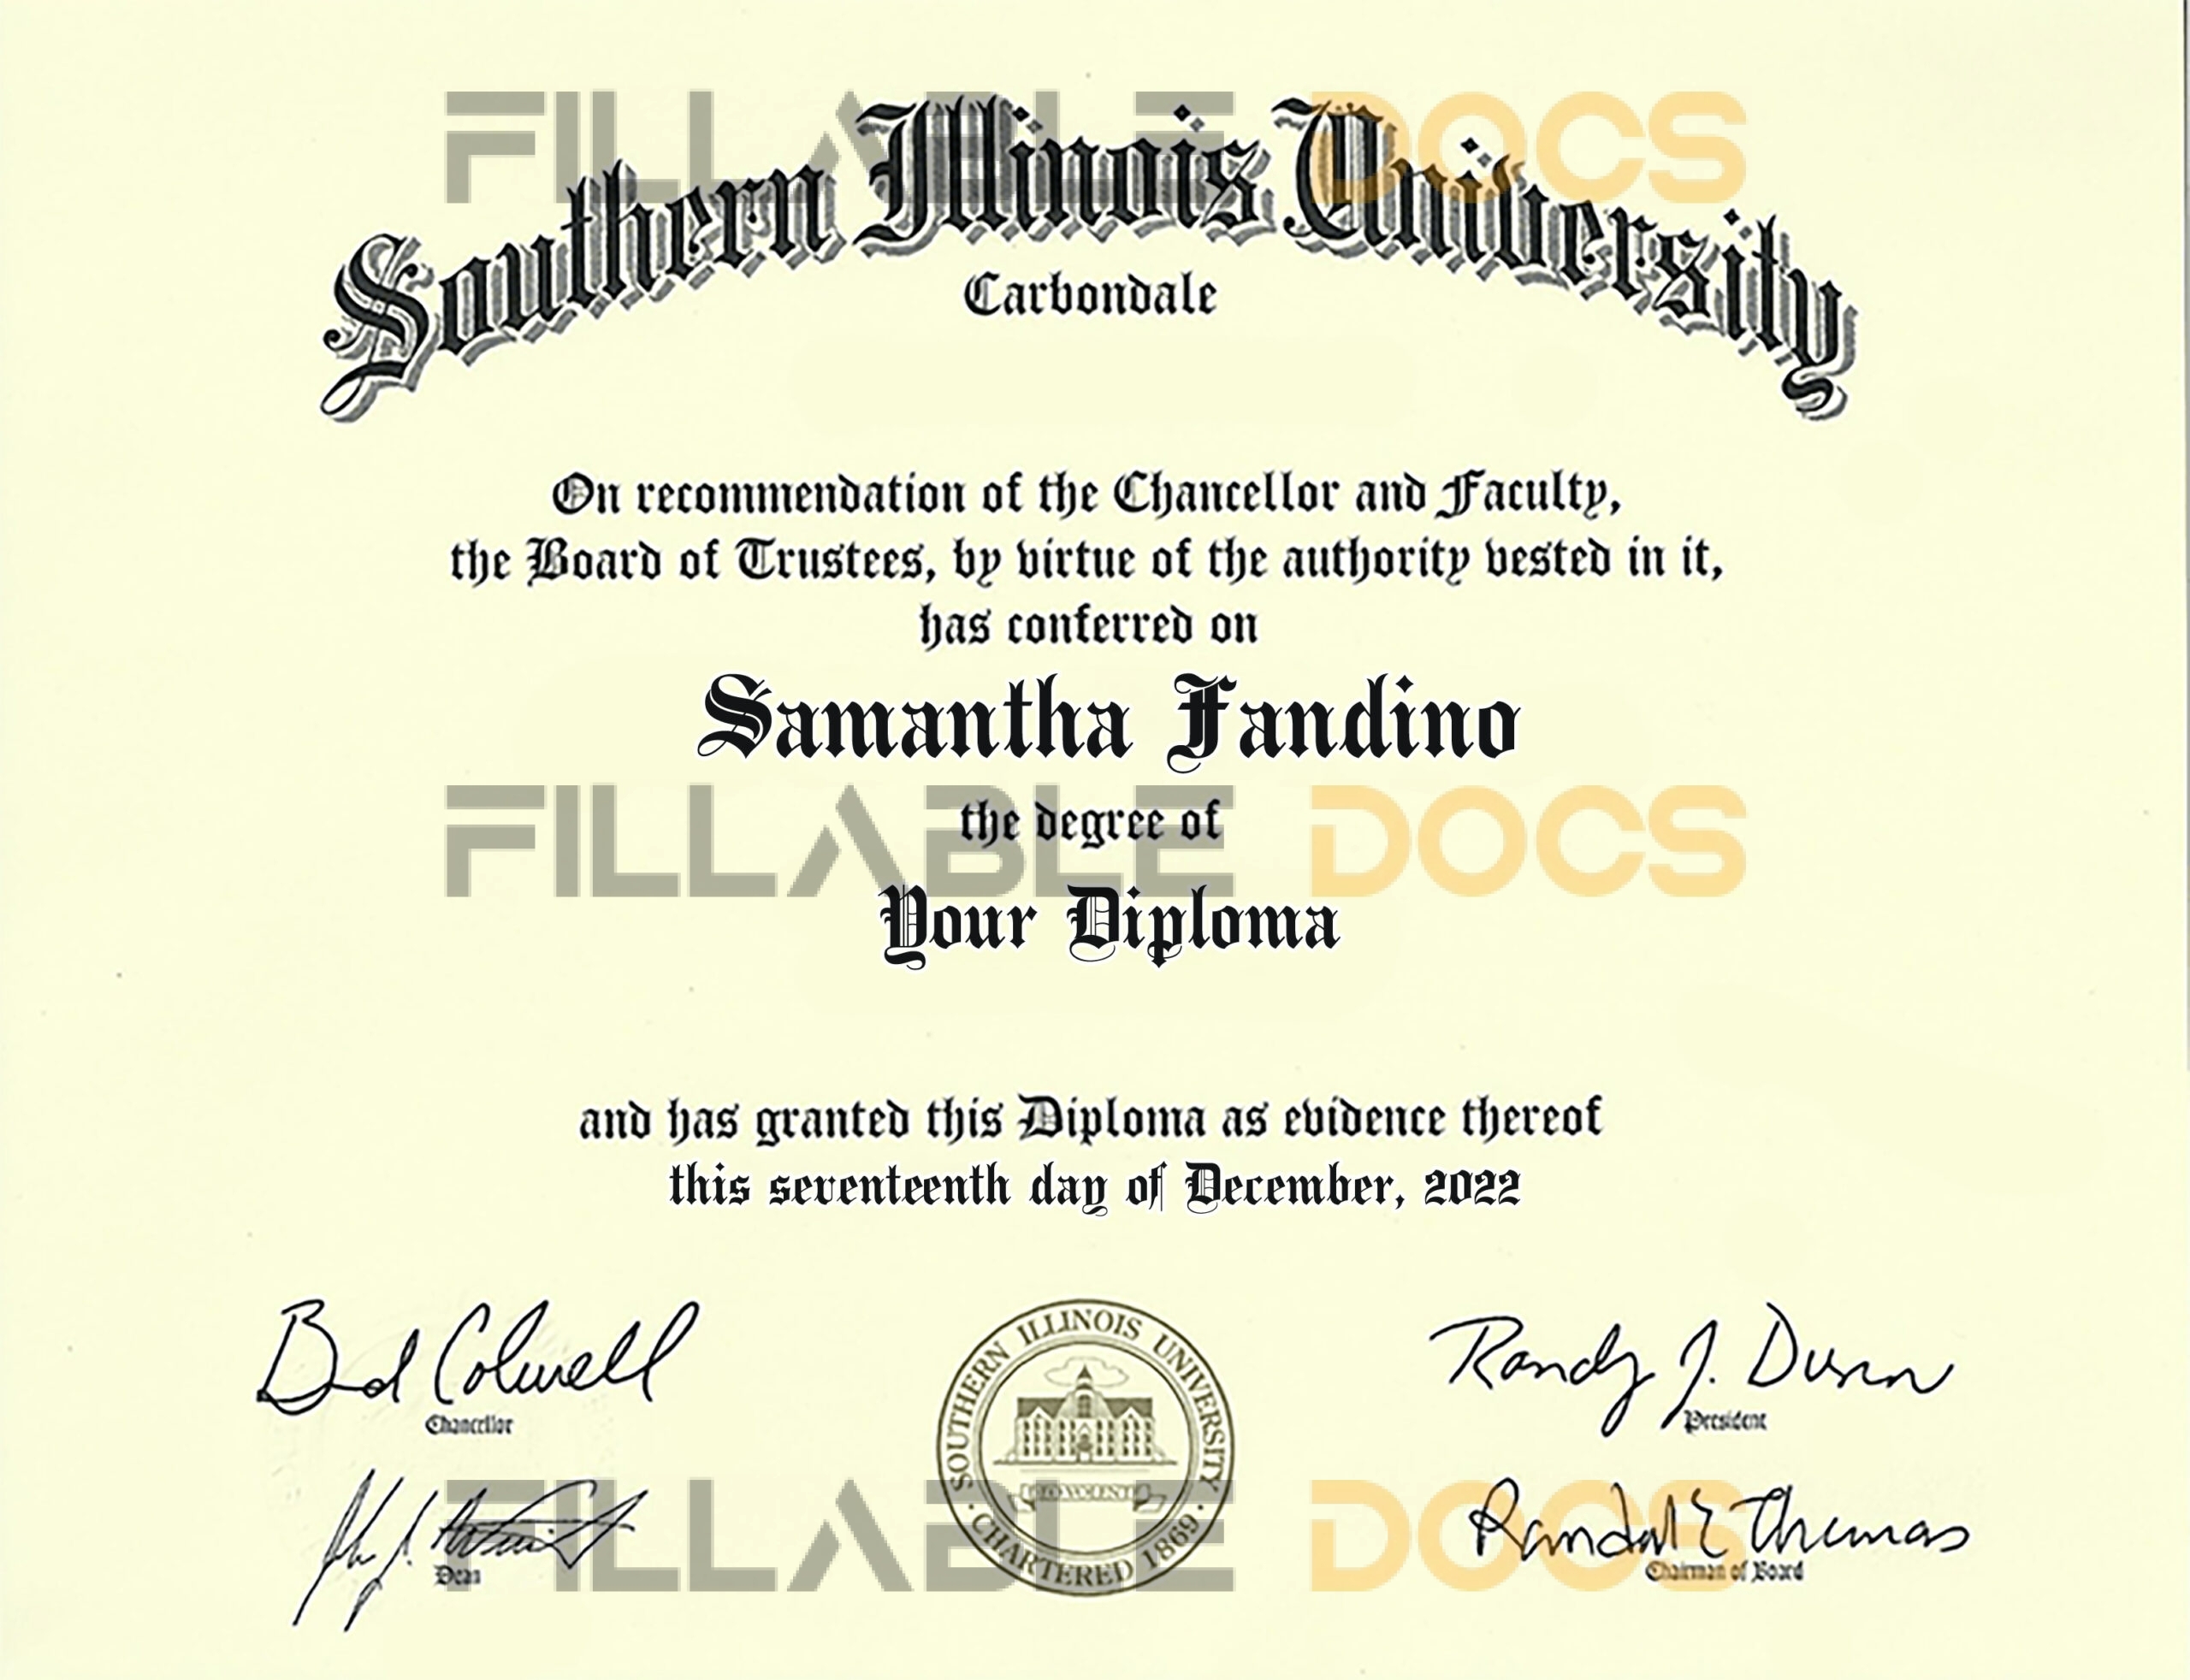 Authentic-Looking Fake certificate from Southern Illinois University